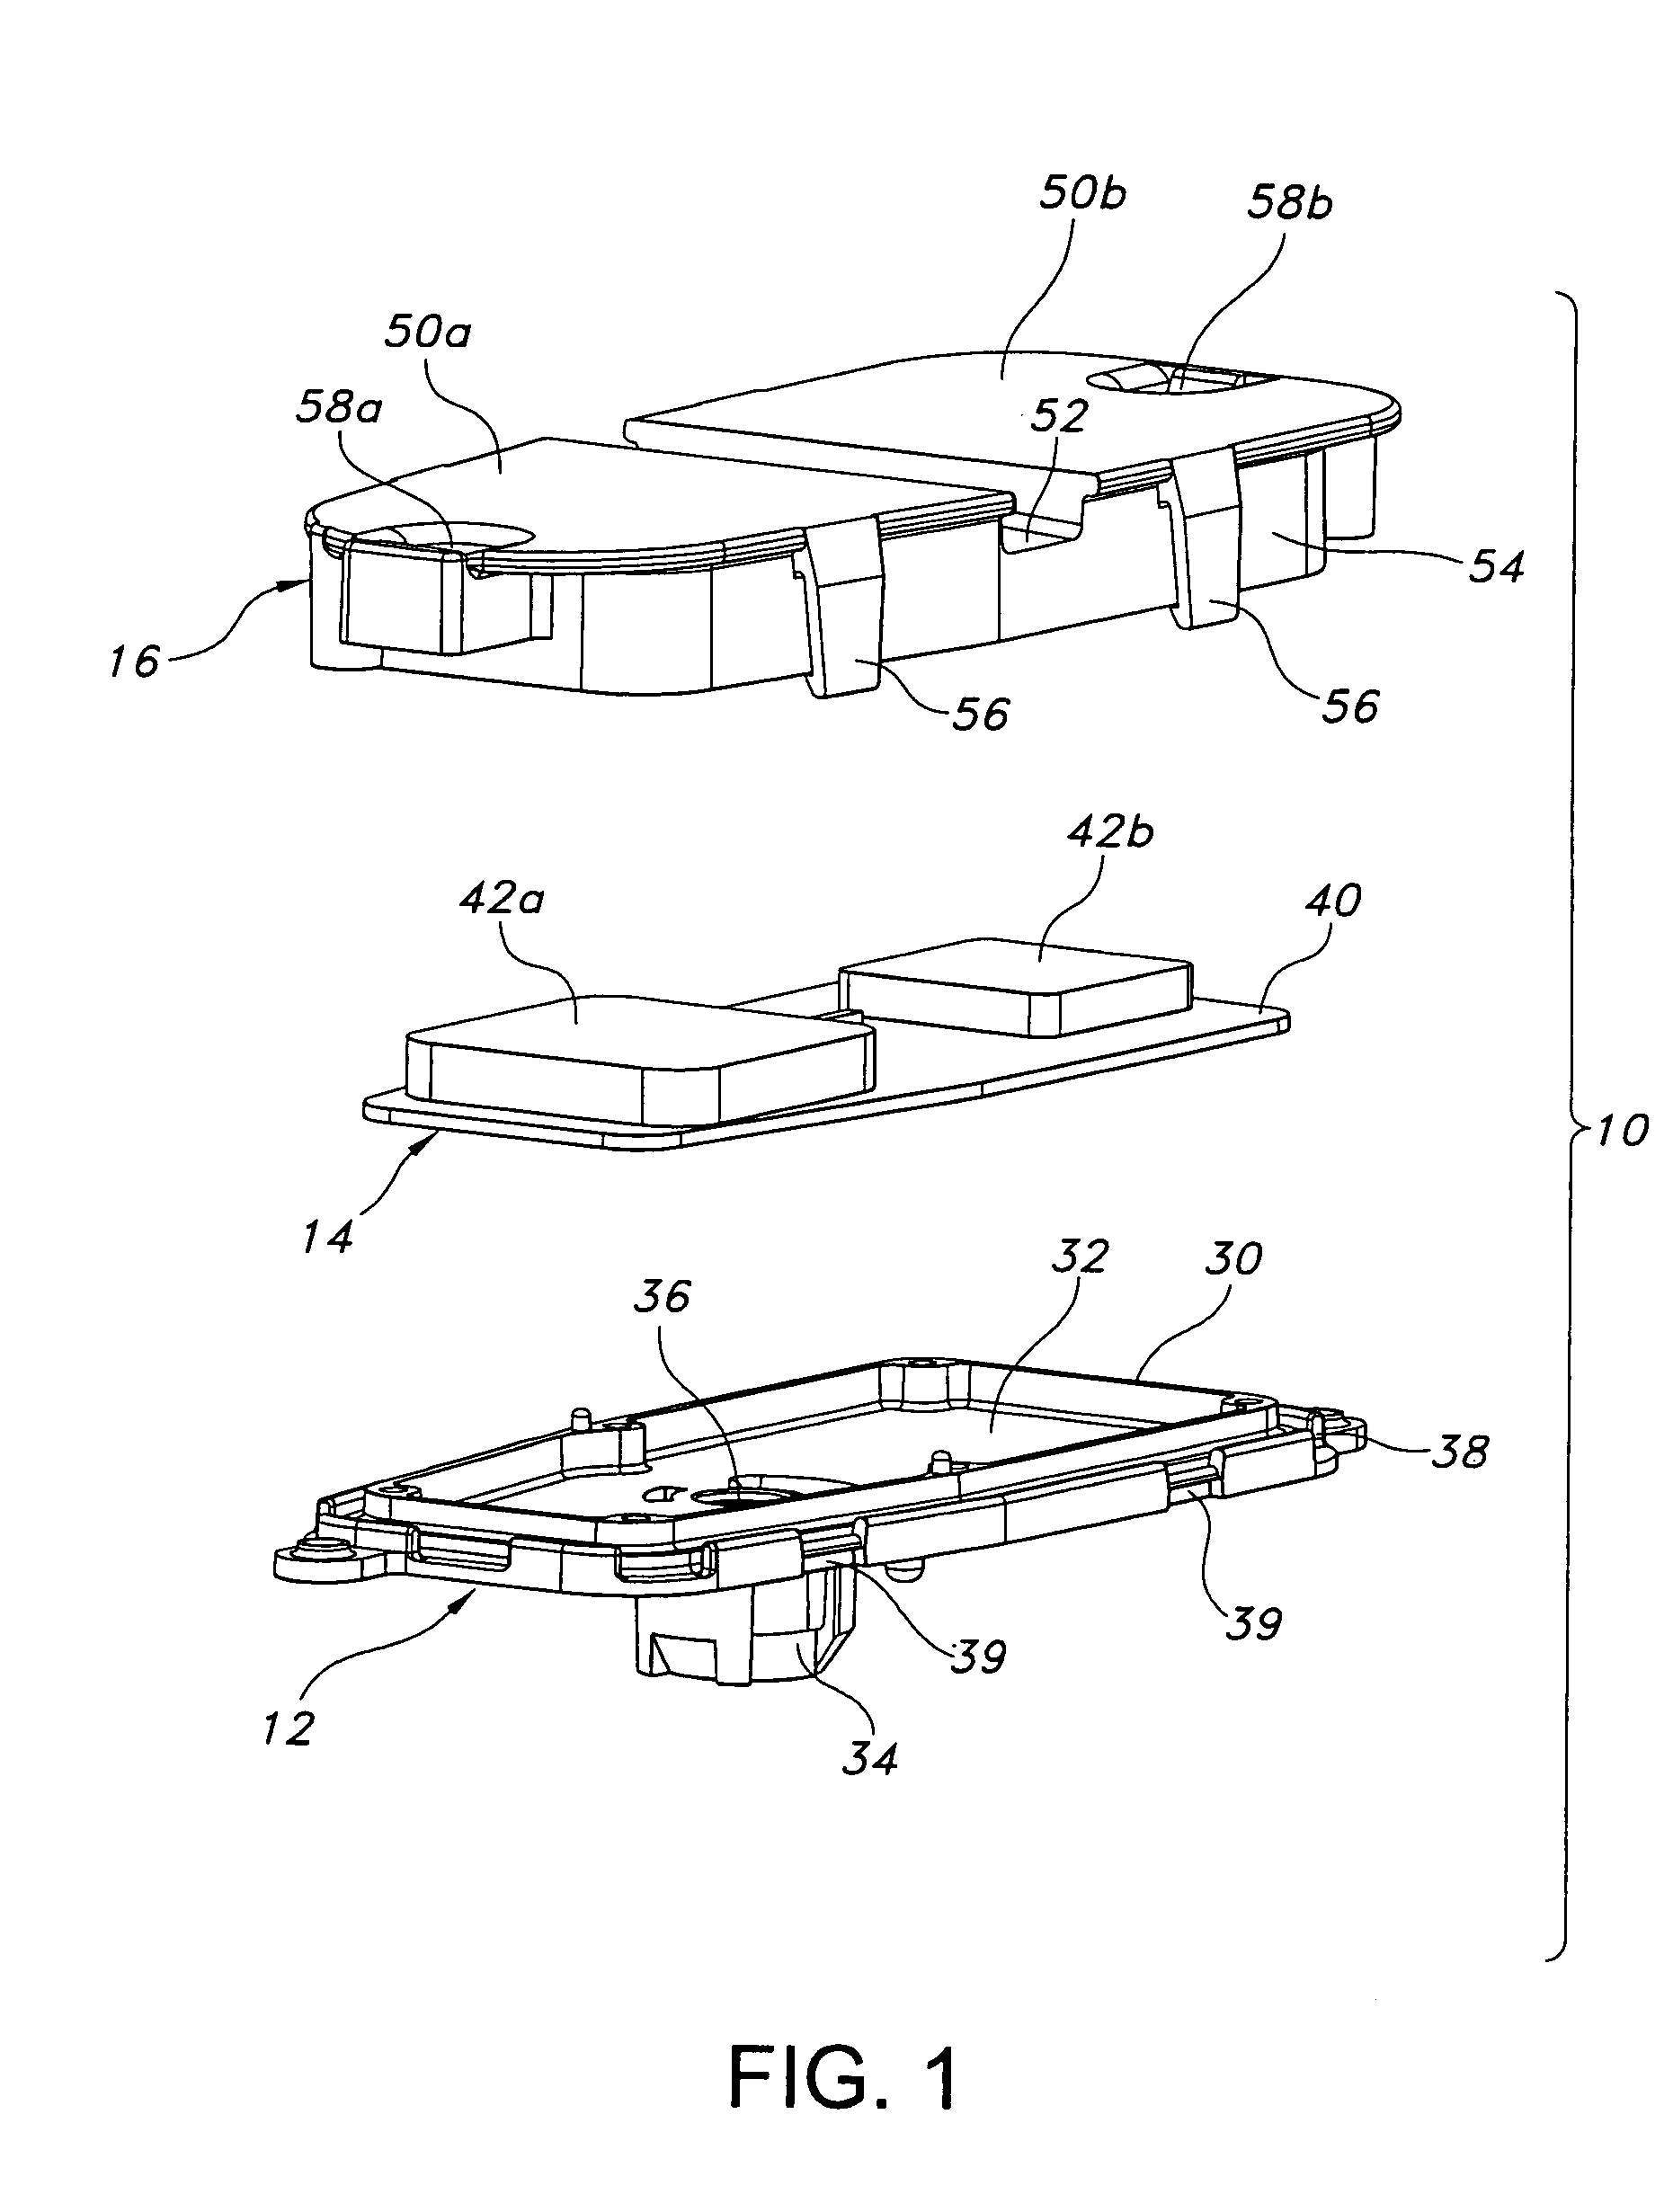 Modular antenna assembly for automotive vehicles